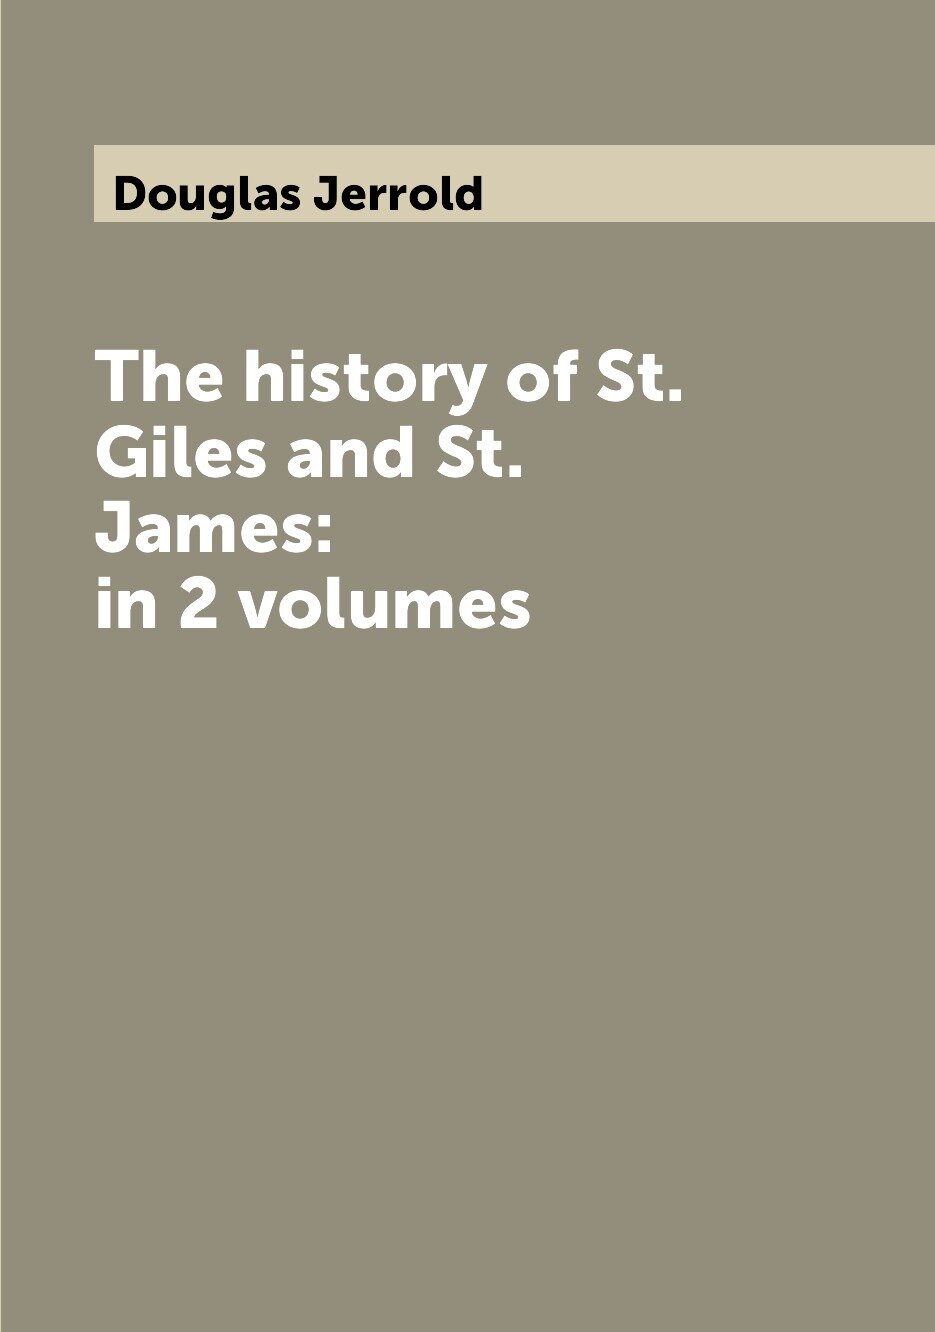 The history of St. Giles and St. James: in 2 volumes